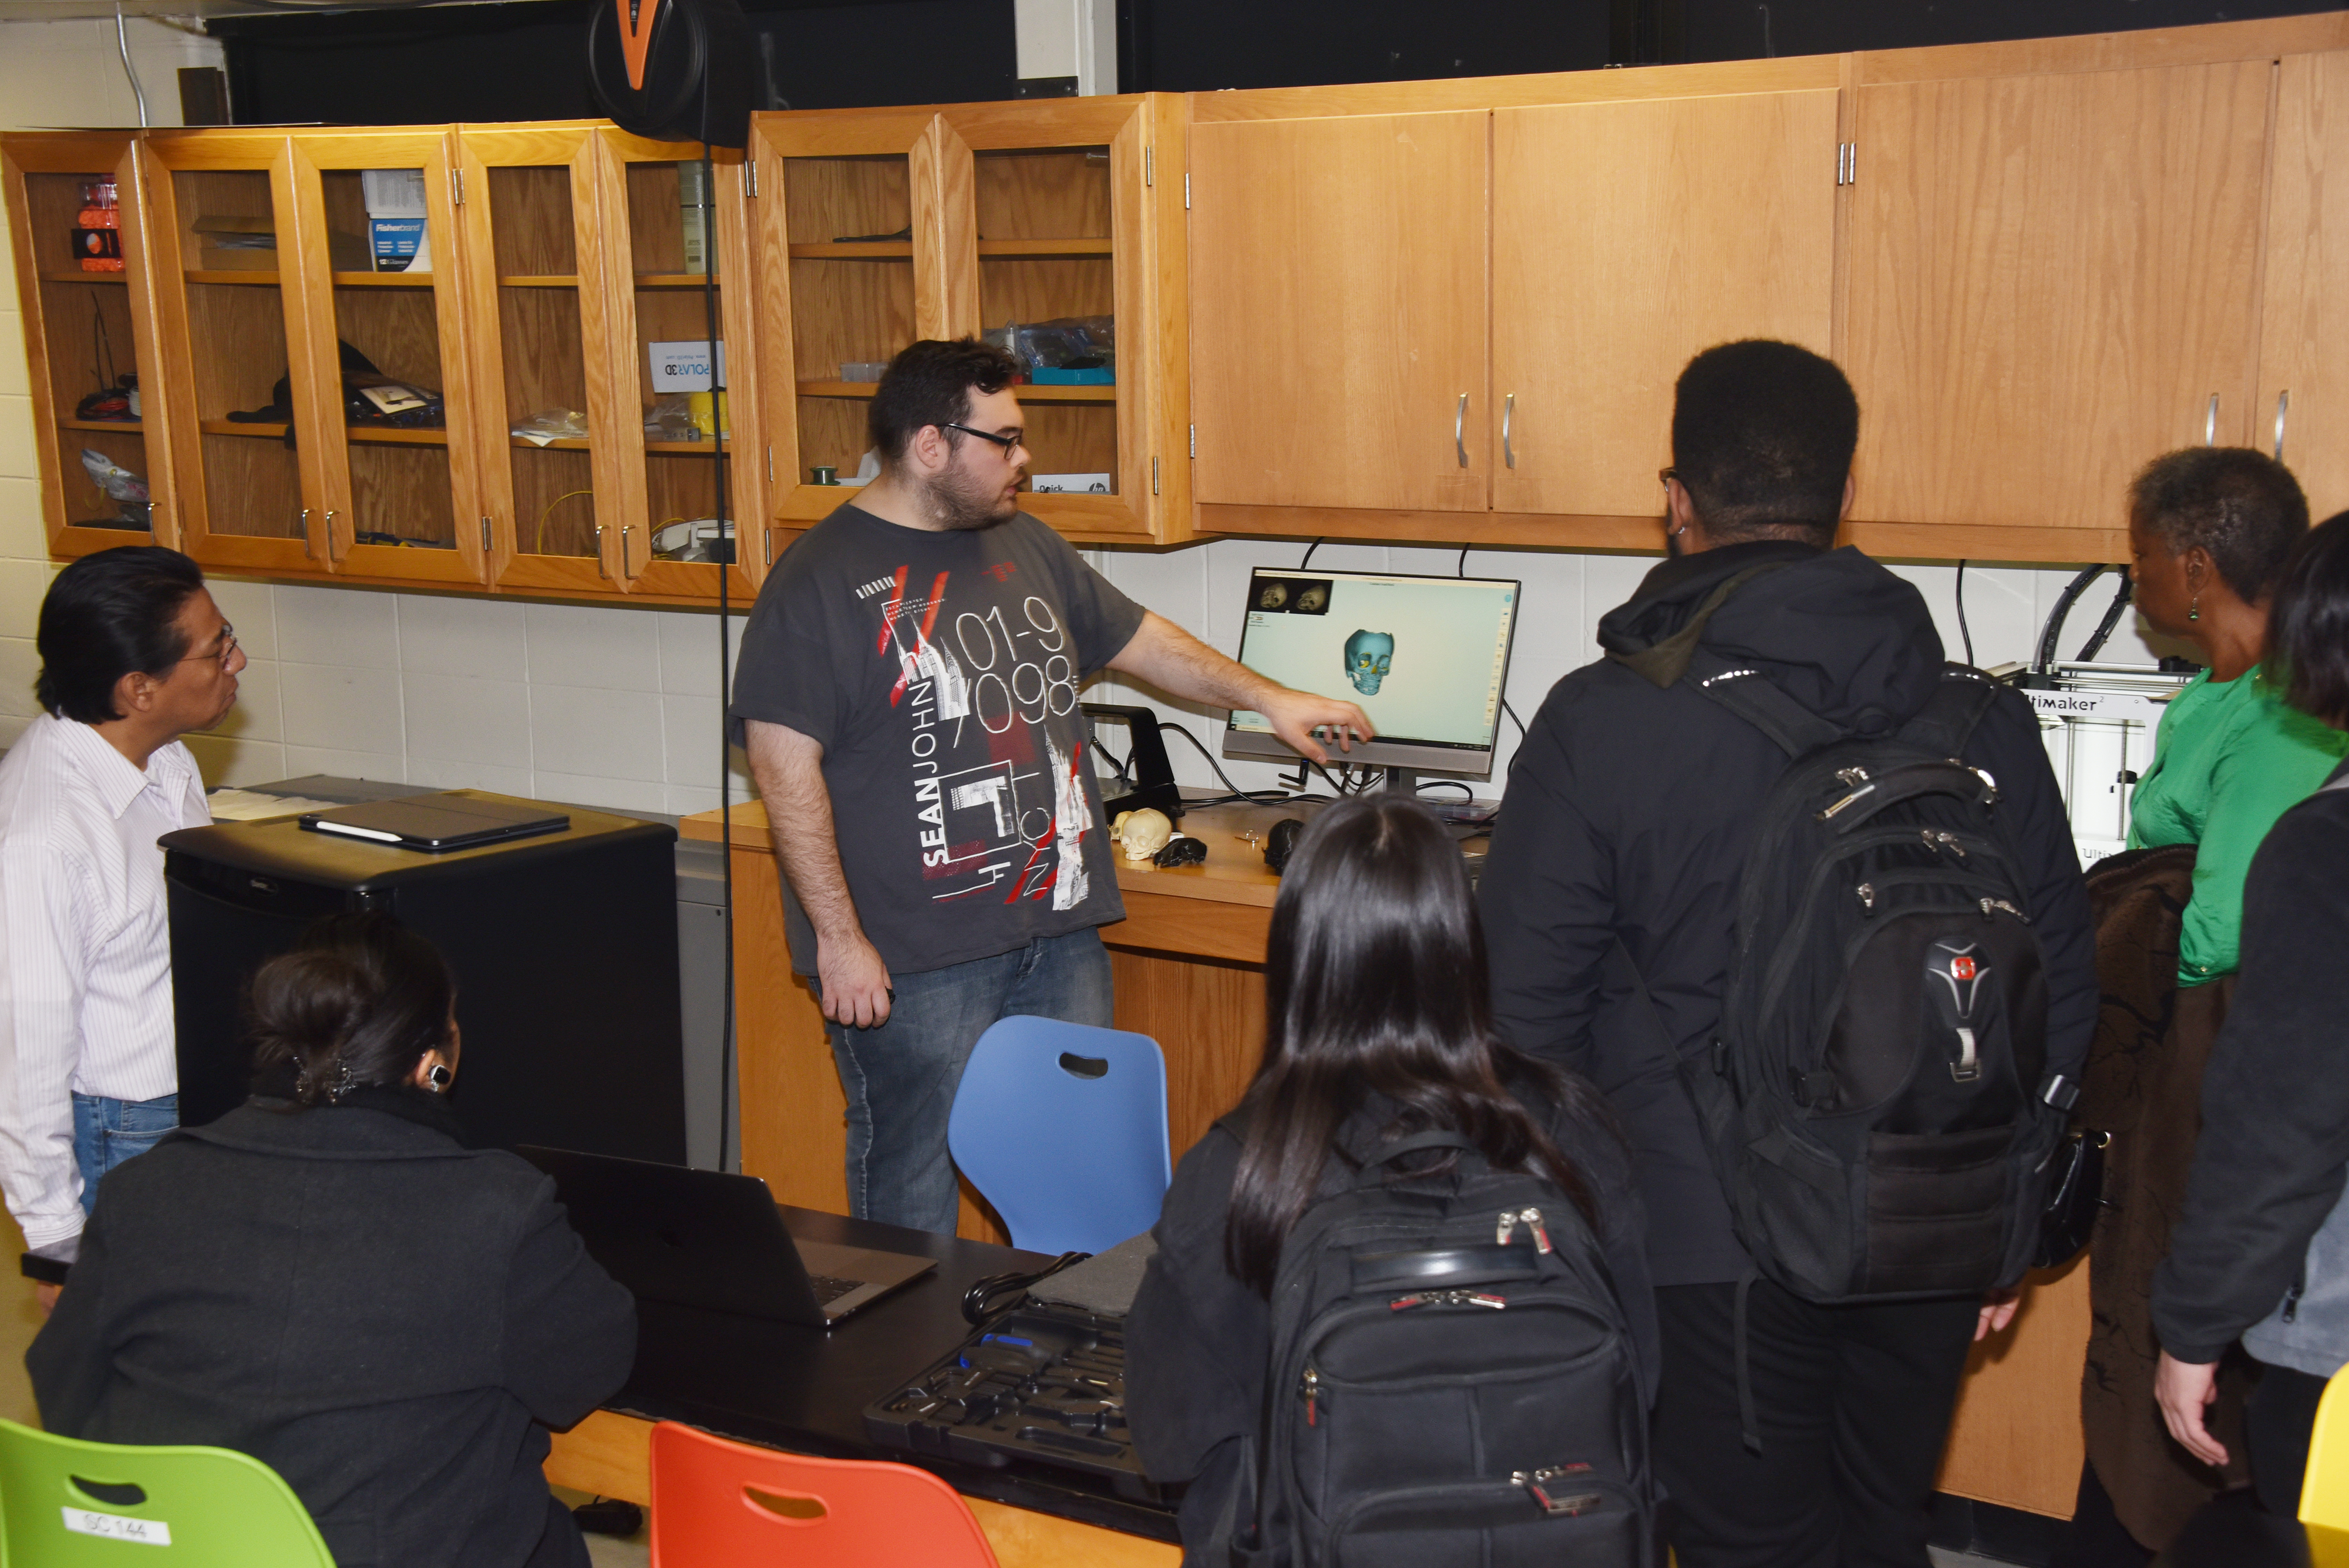 Rodrigo Lapenne, a junior information technology major, shows the capabilities of the 3D scanner during a Jan. 31 Open House held on the day the Makerspace was launched.